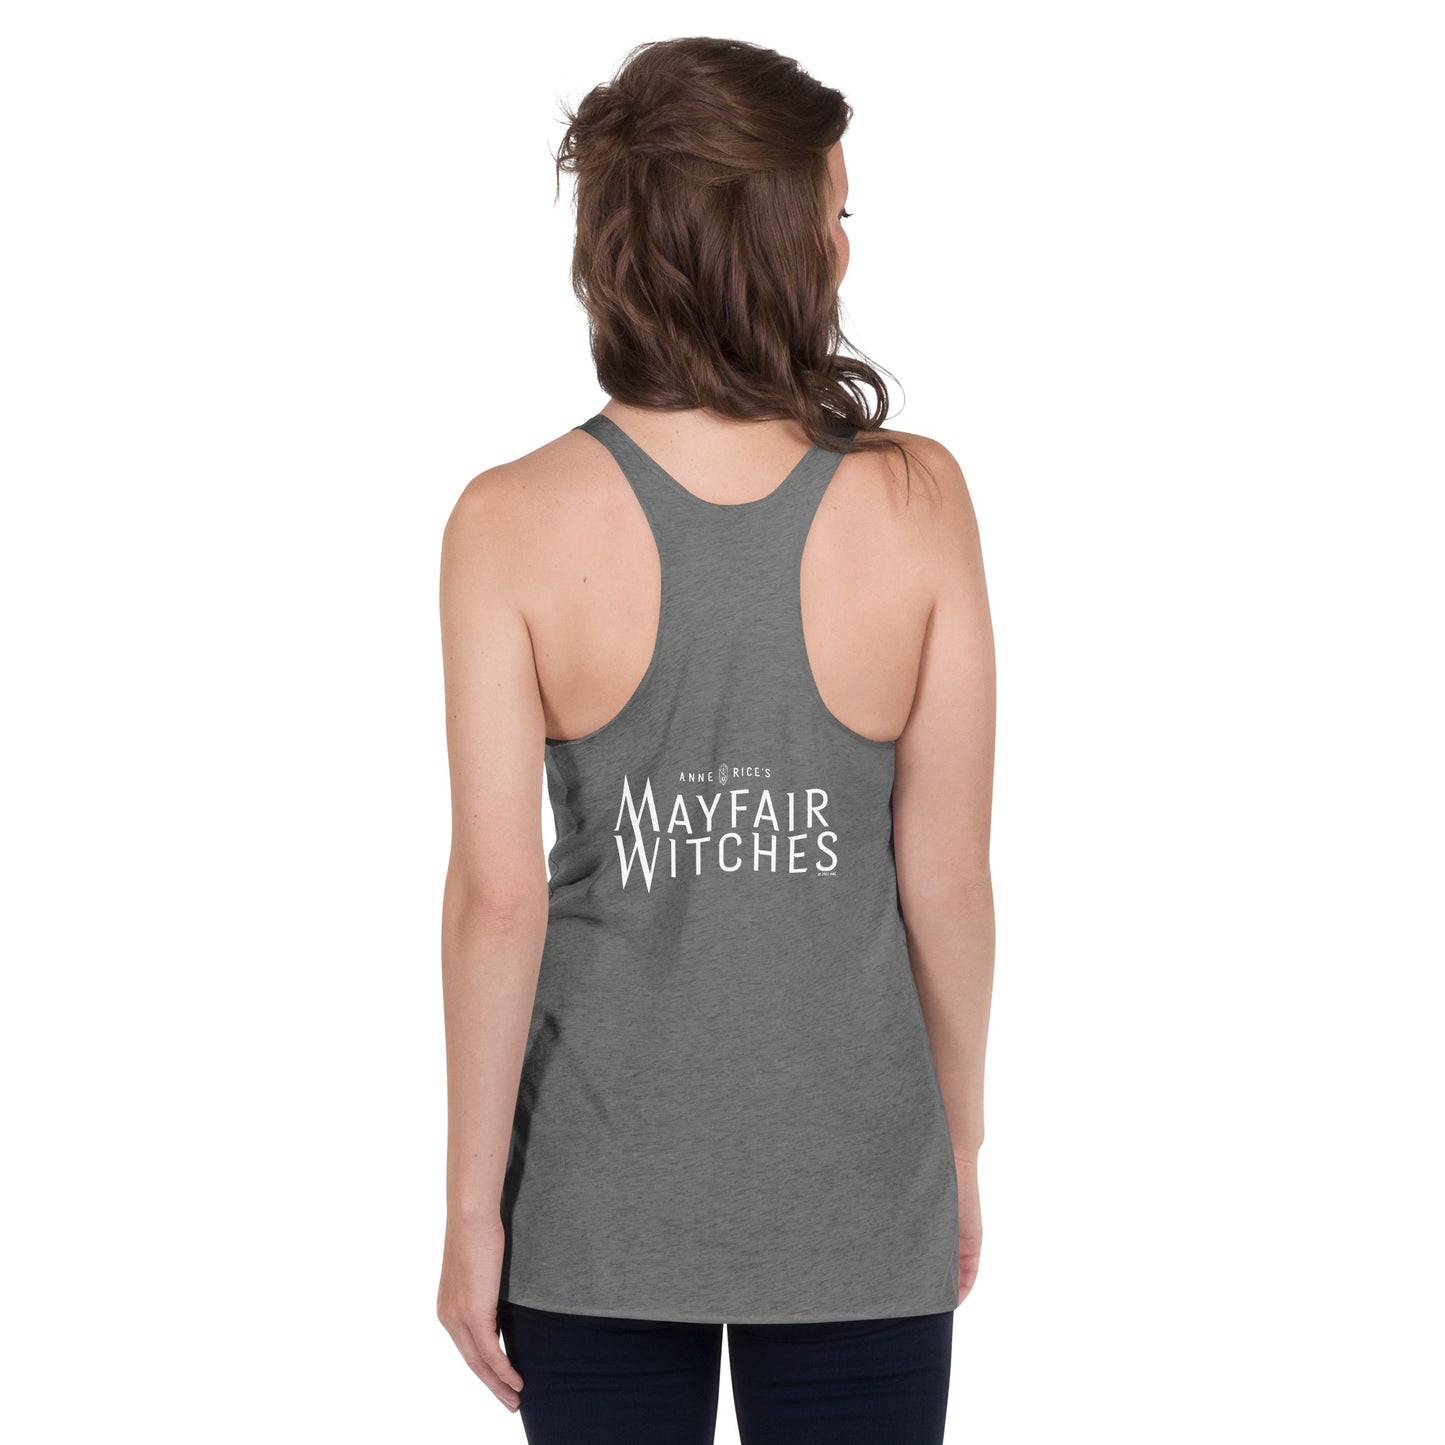 Anne Rice's Mayfair Witches Talamasca Women's Tri-Blend Racerback Tank Top